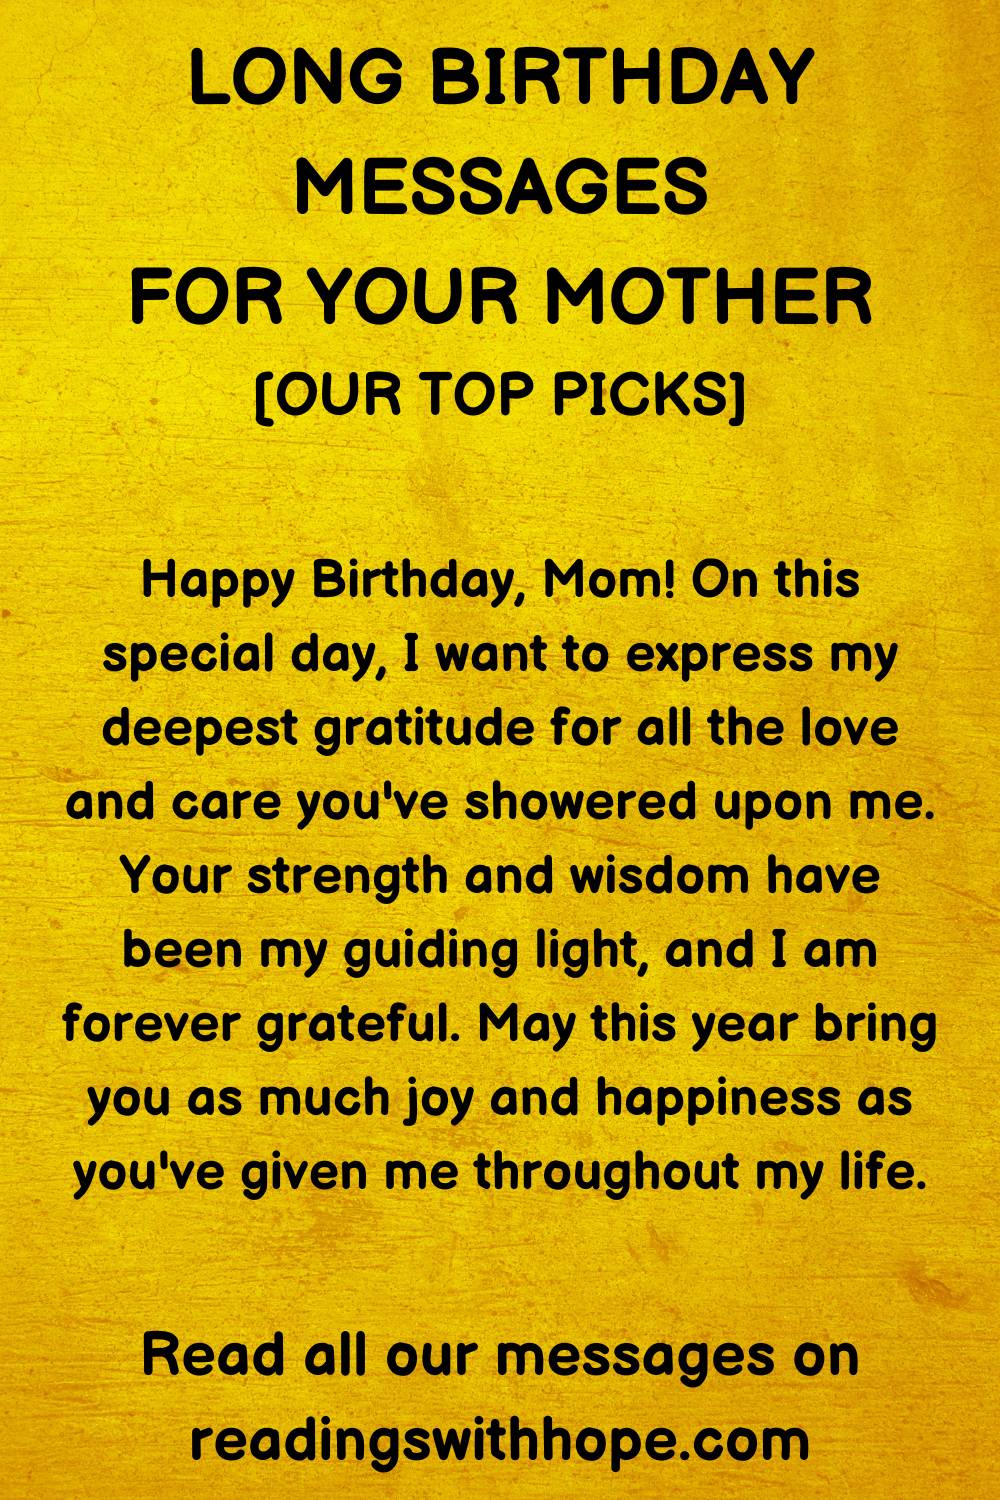 Funny Happy Birthday Messages For Mother